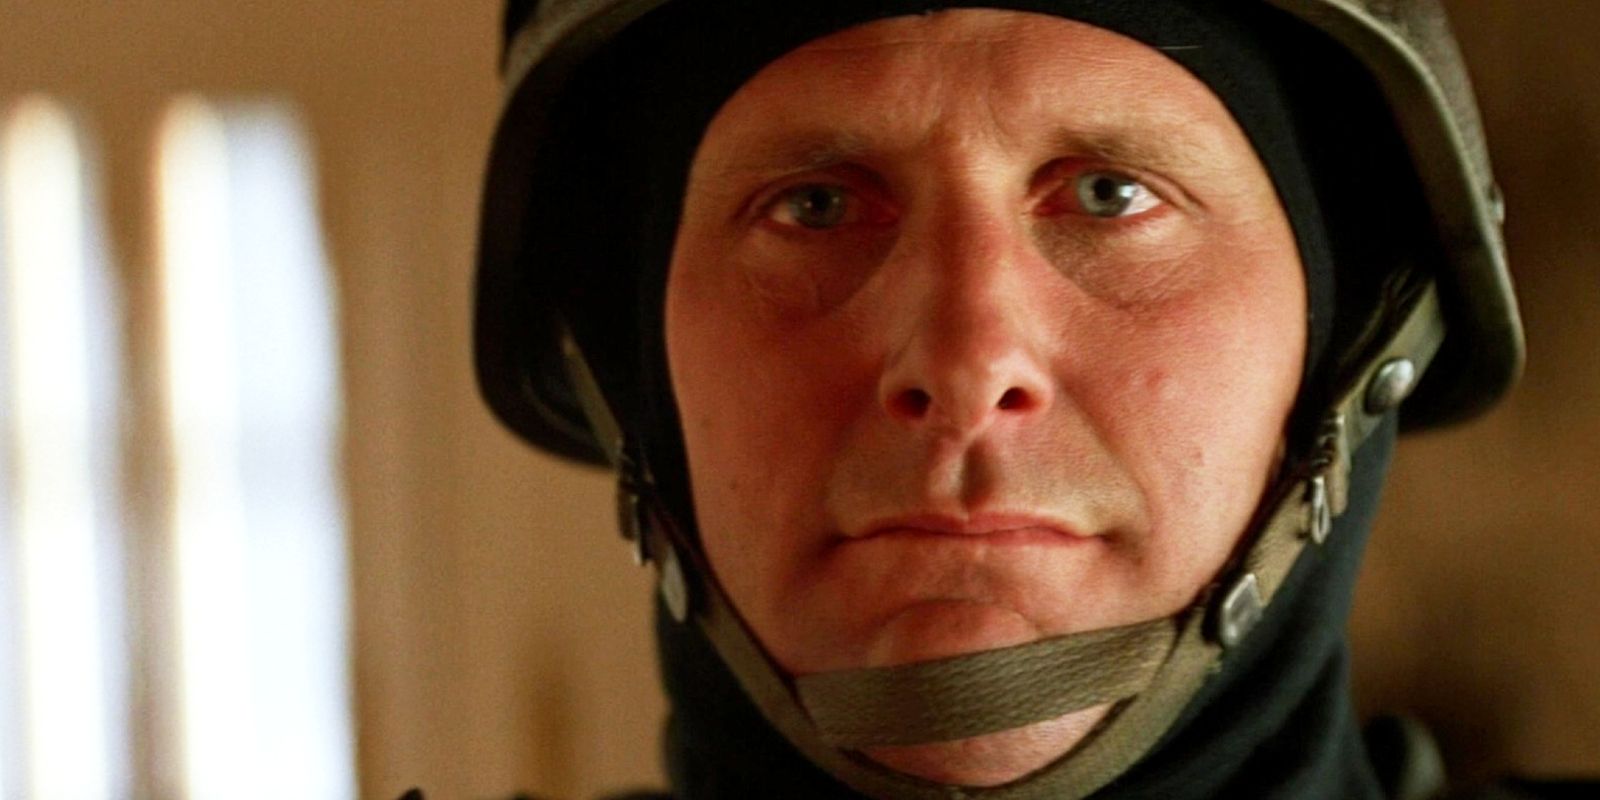 Jeff Daniels 10 Best Movies & TV Shows, Ranked